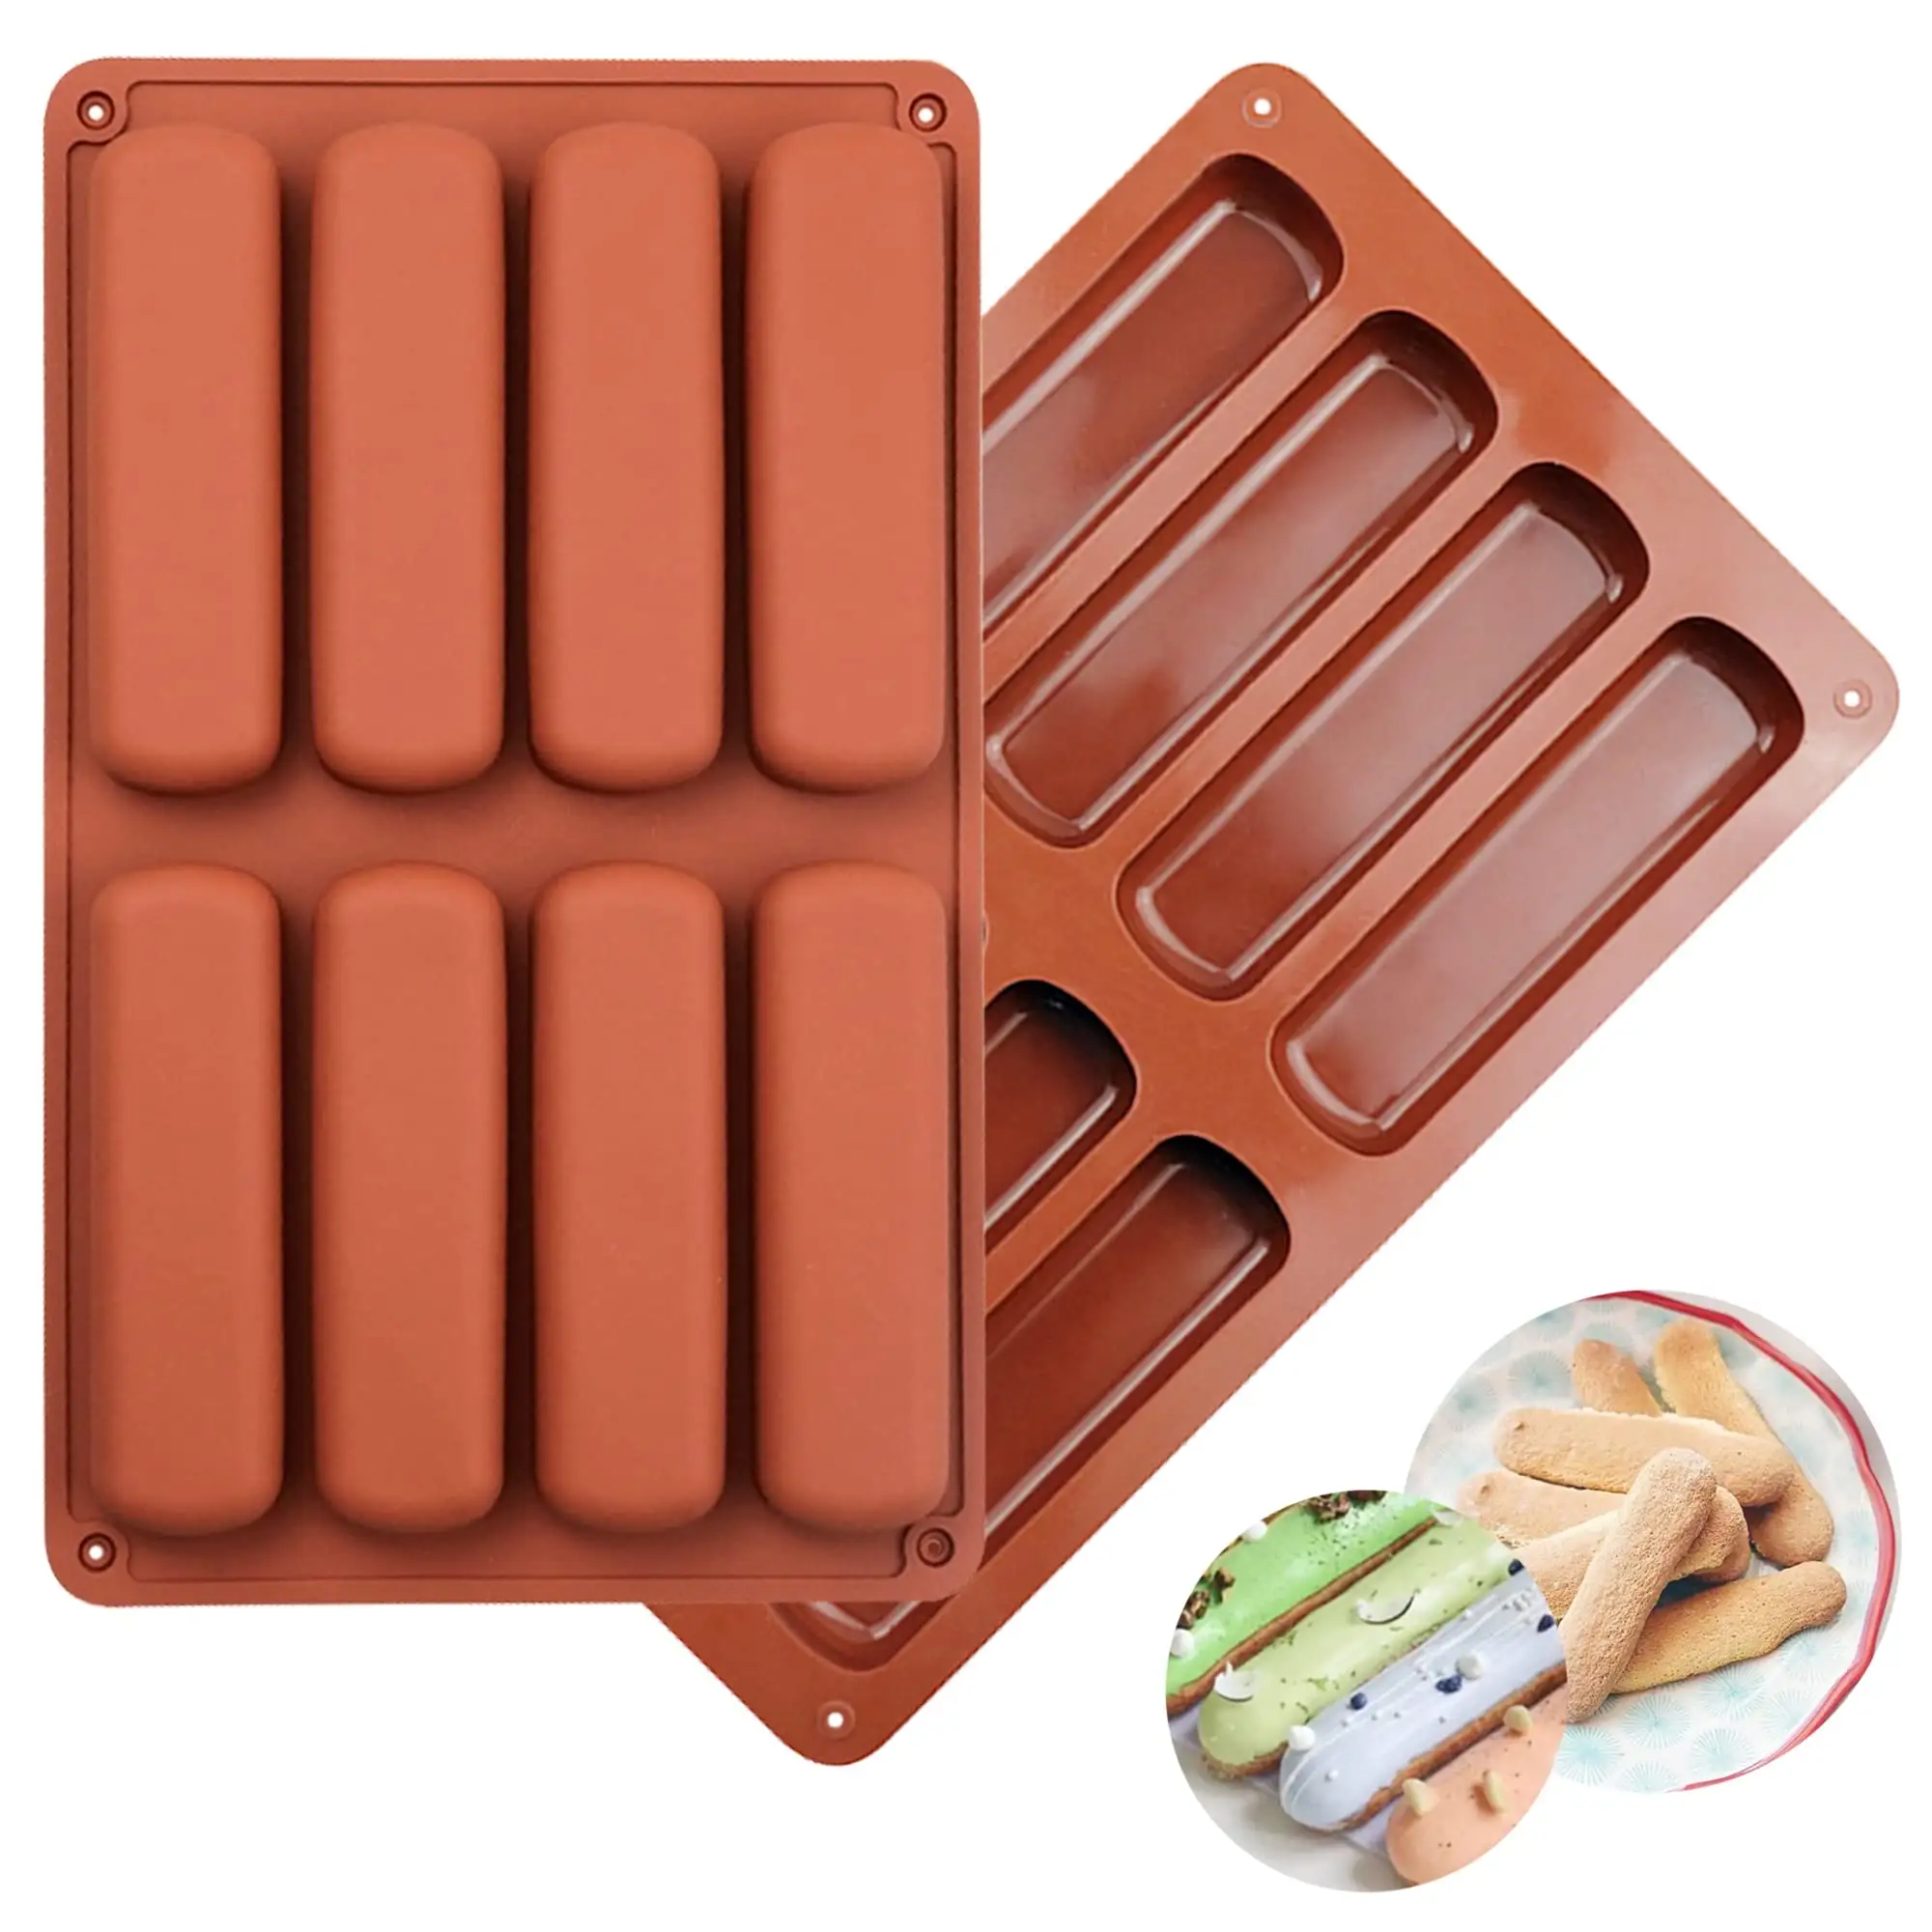 Food grade silicone 8 Cavity rectangular shape Chocolate mousse candy oatmeal pastry mold foldable Chocolate bar mould